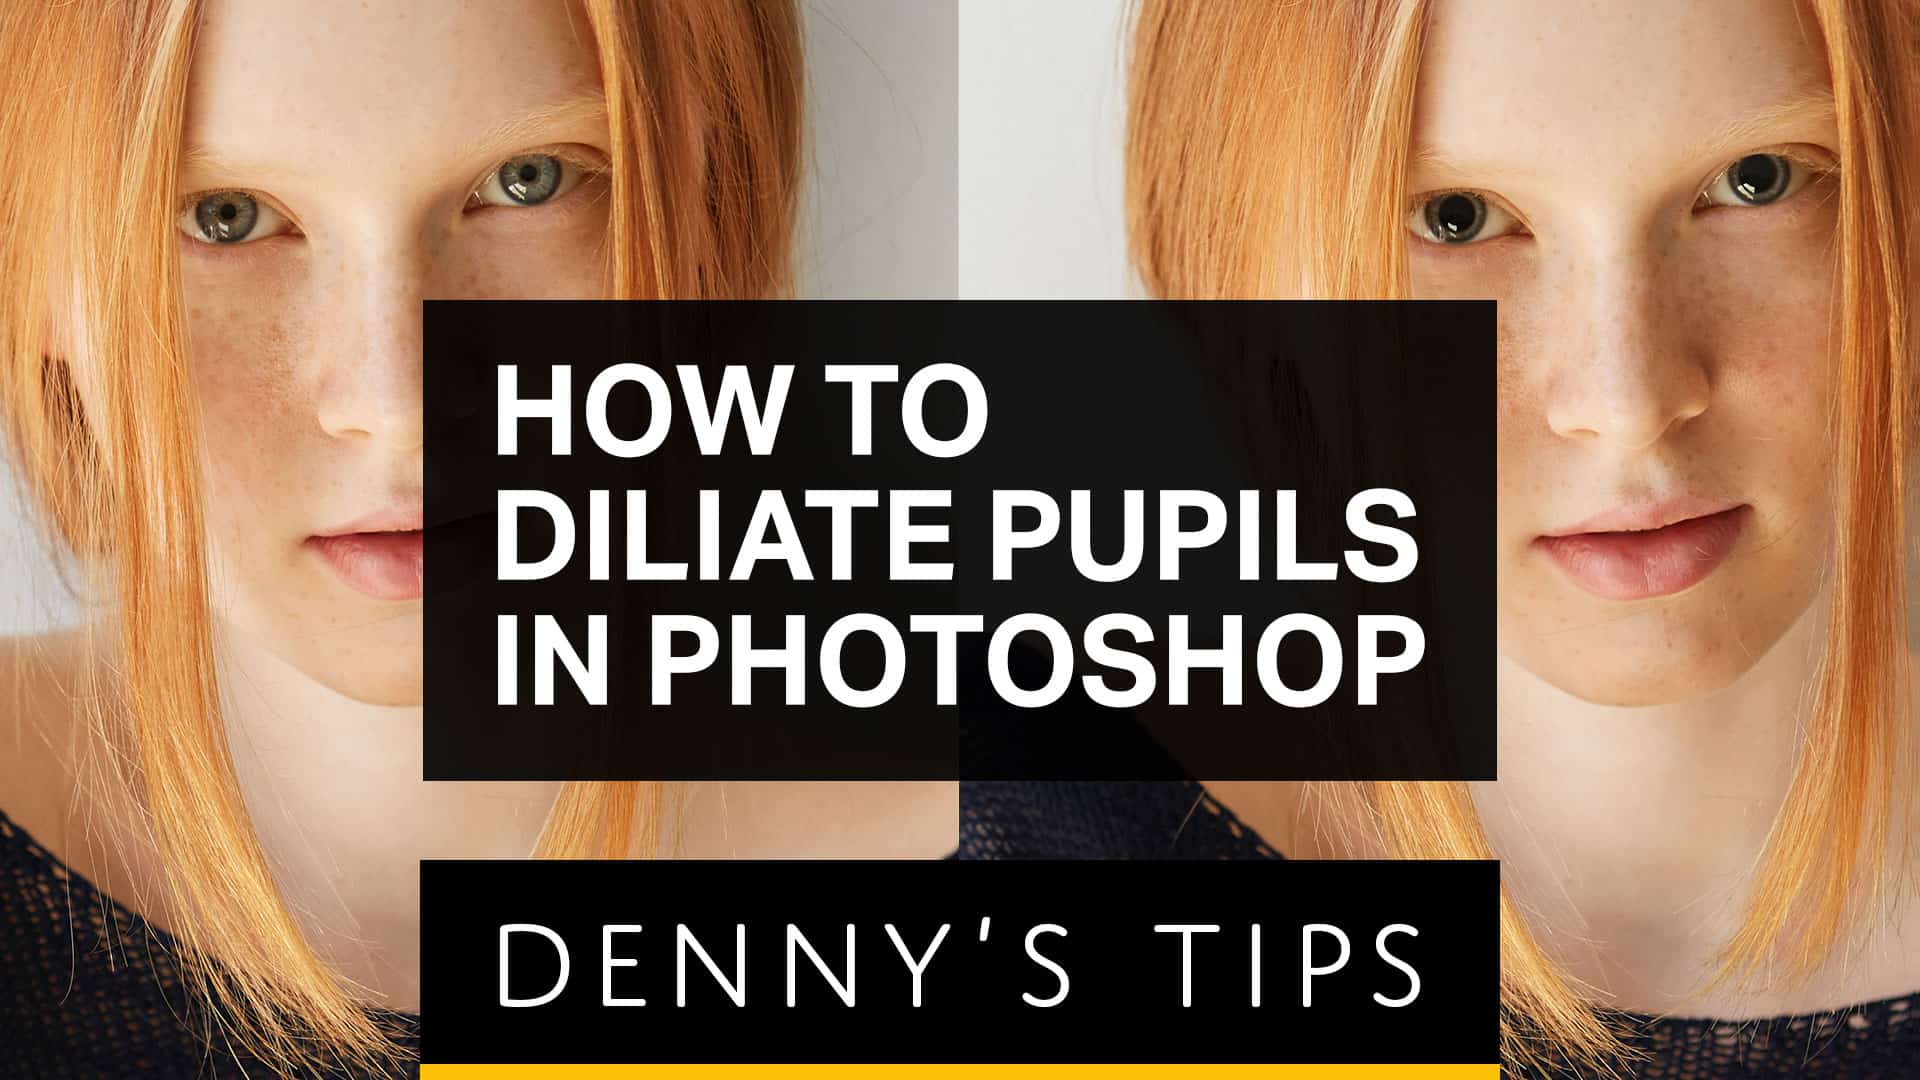 How to Dilate Pupils in Photoshop